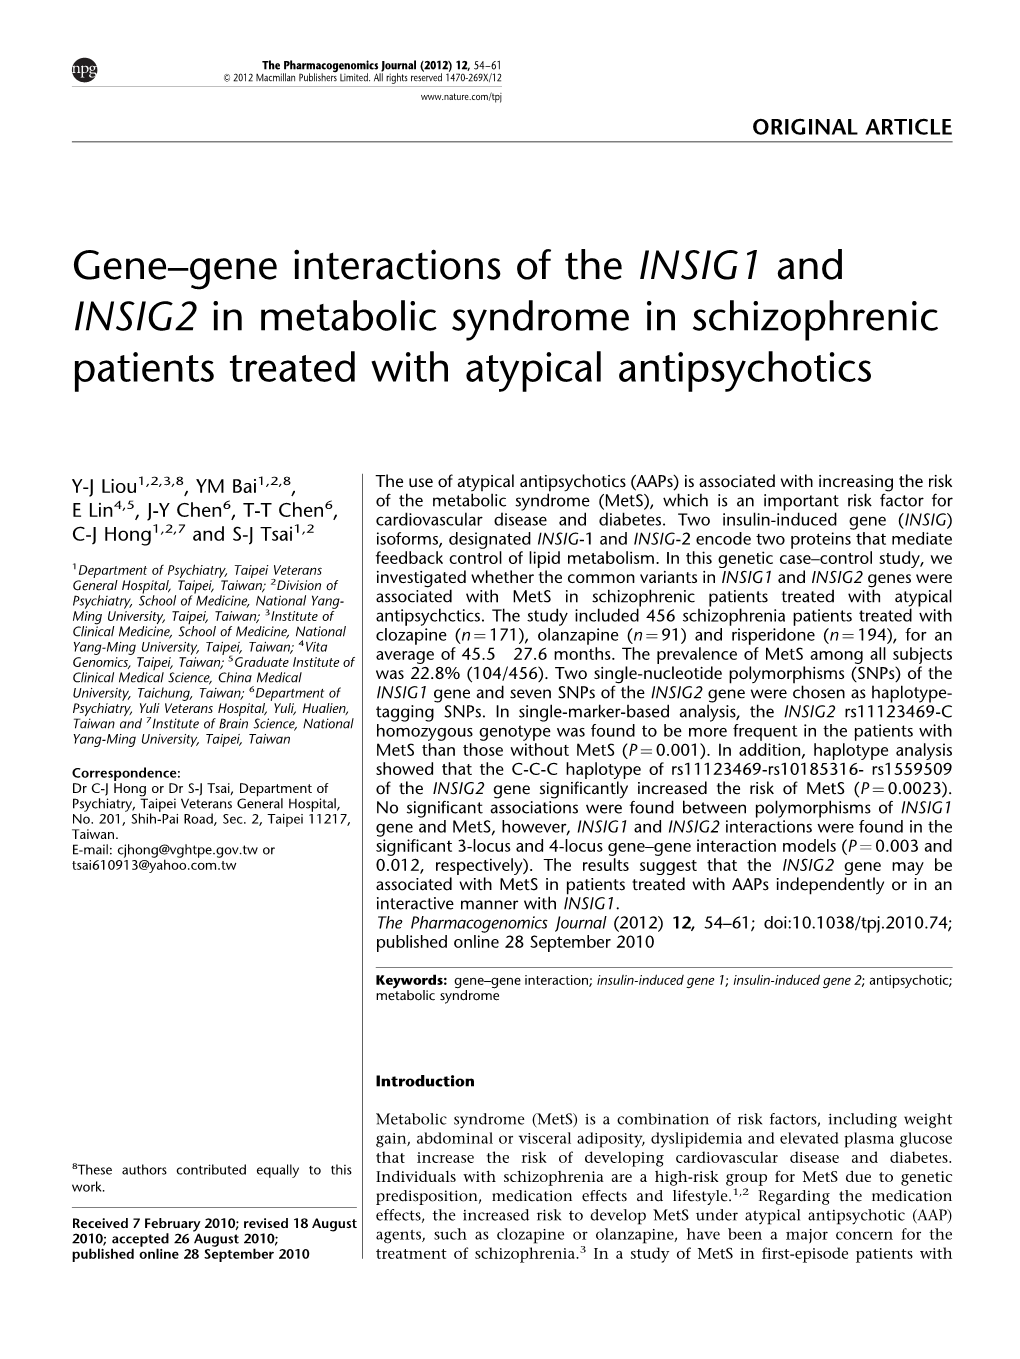 Gene Interactions of the INSIG1 and INSIG2 in Metabolic Syndrome in Schizophrenic Patients Treated with Atypical Antipsychotics